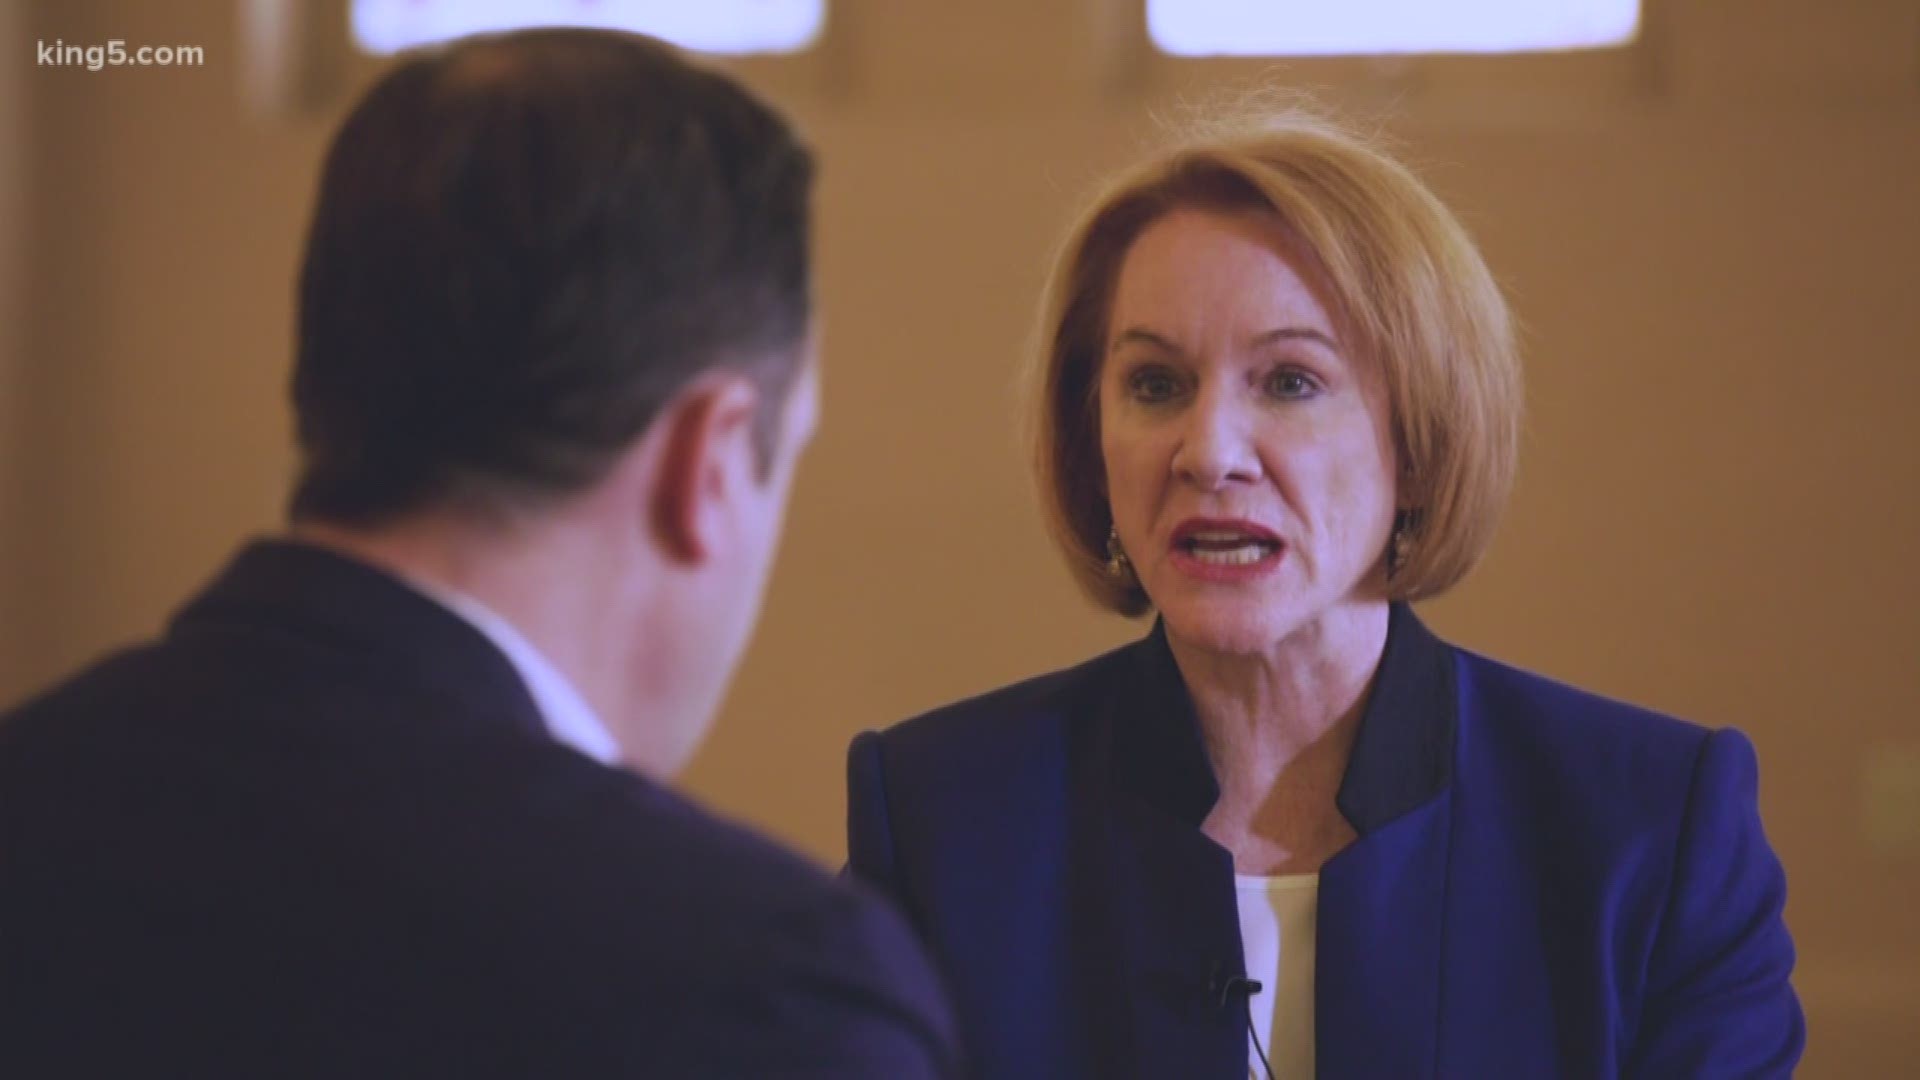 Chris Daniels and Jenny Durkan talk about major problems facing the city including homelessness, NBA speculation, and her plans for the future